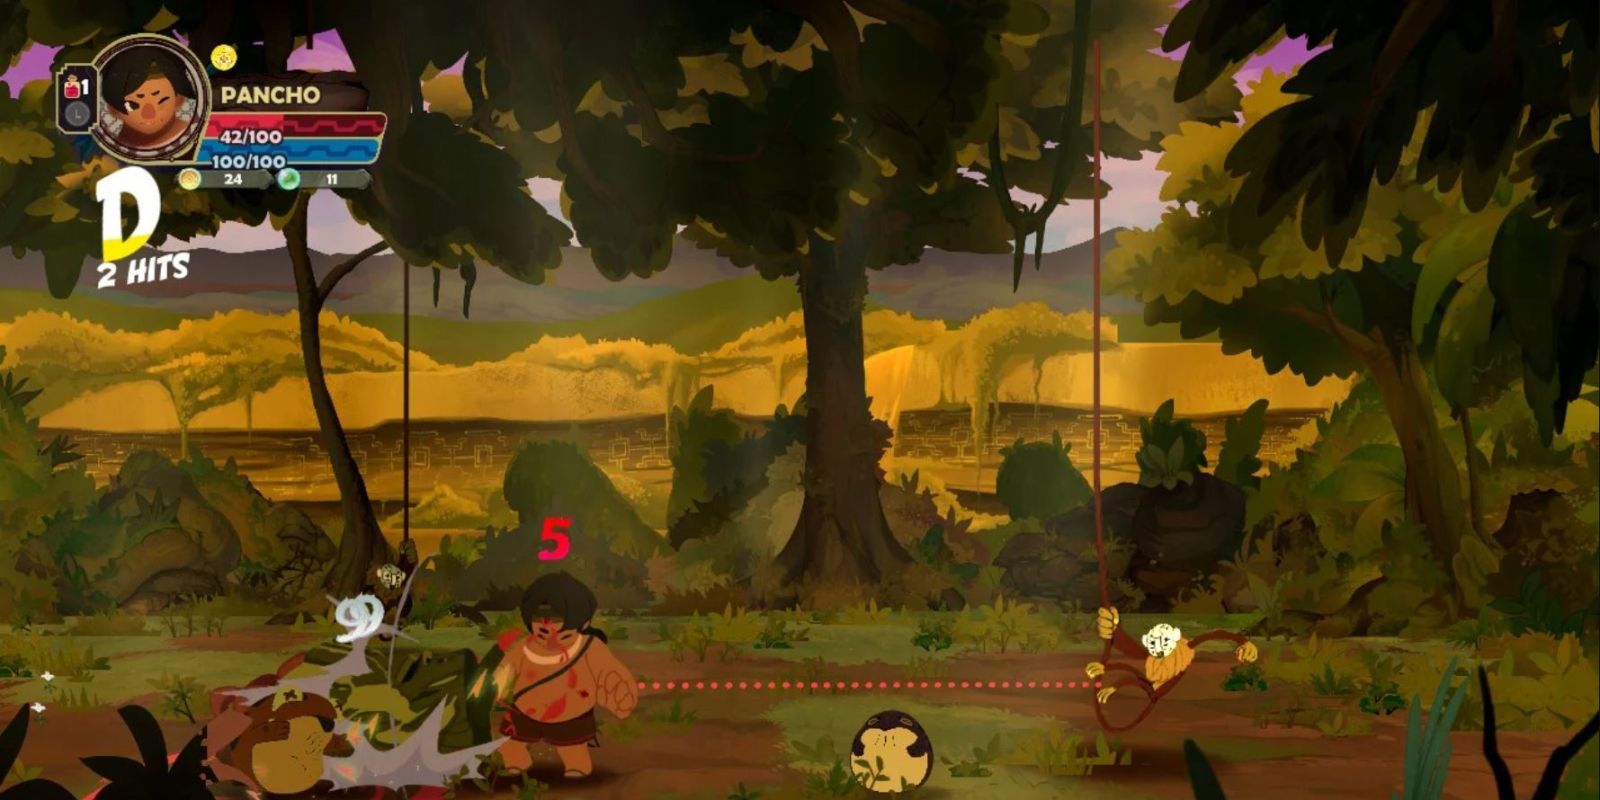 A screenshot of Tunche where Pancho is battling several monsters